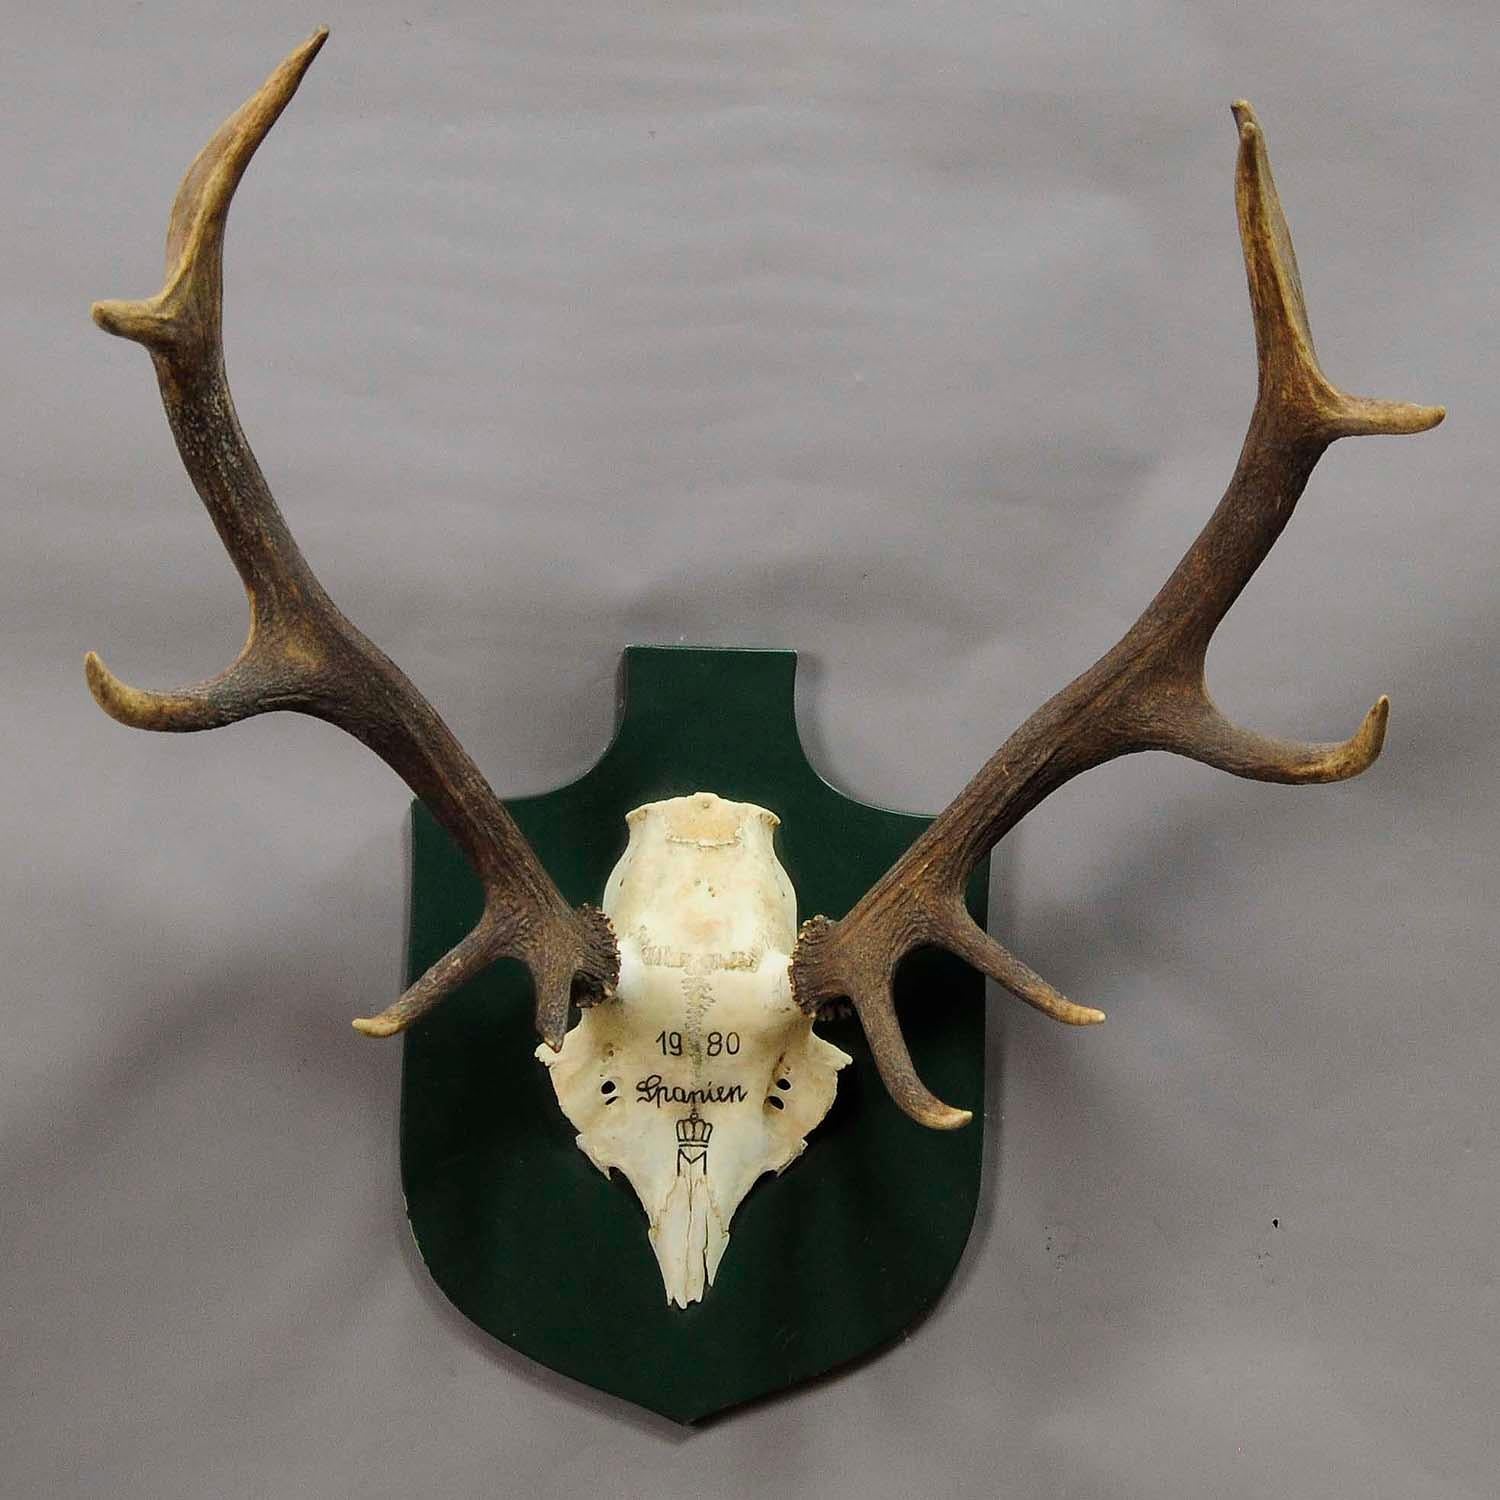 A vintage 12 pointer black forest deer trophy from the palace of Salem in south Germany. Shoot by a member of the lordly family of Baden in 1980. With handwritten inscription and family crest on the skull. Mounted on a wooden plaque, good